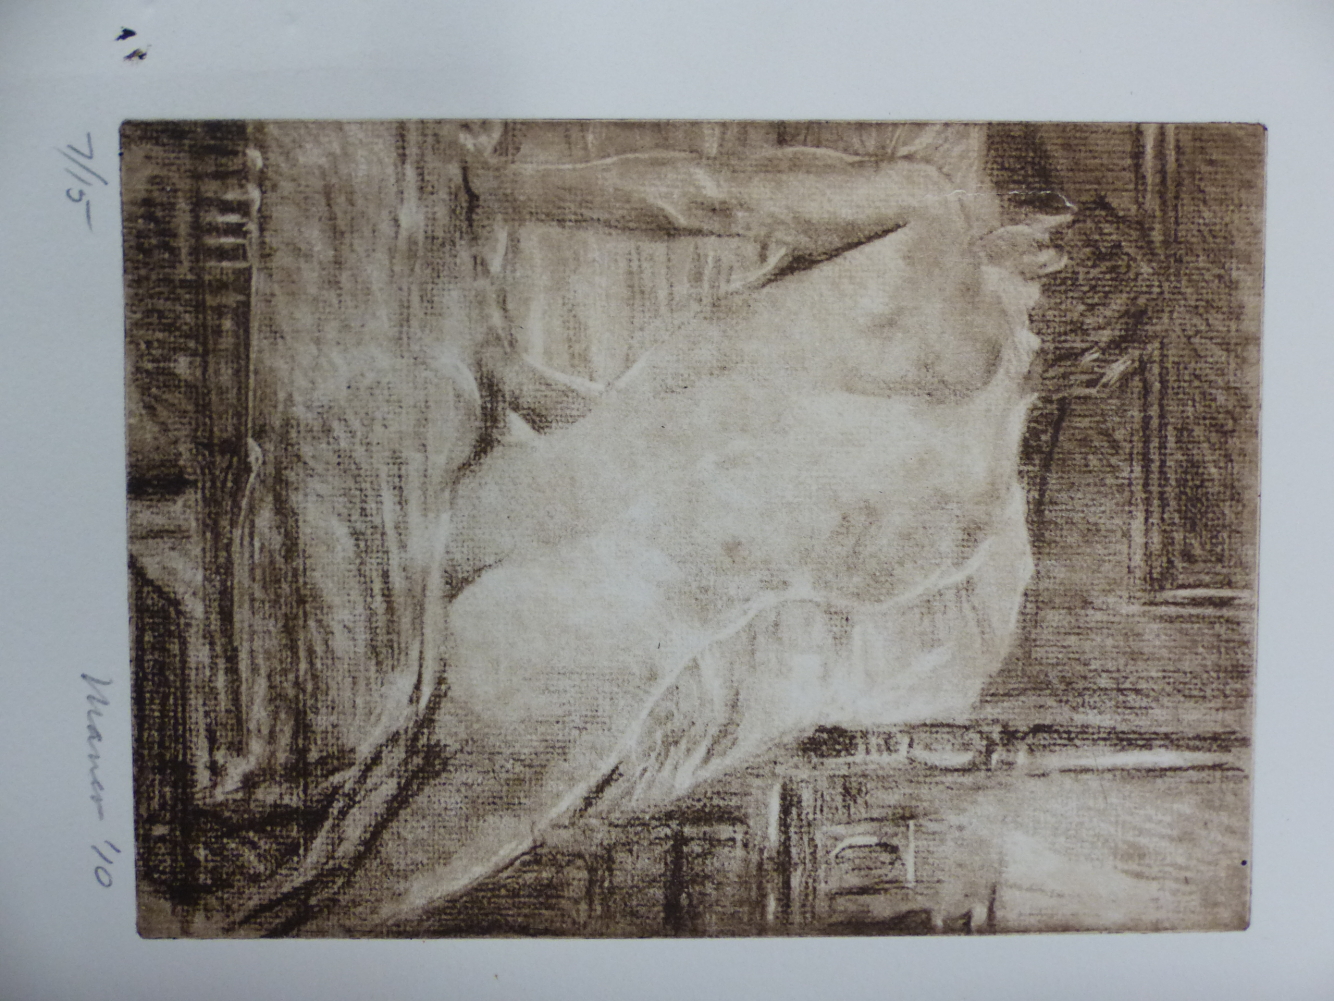 SIX 20th/21st C. ETCHINGS OF FIGURAL SUBJECTS BY DIFFERENT HANDS, MOST PENCIL SIGNED INCLUDES - Image 3 of 6